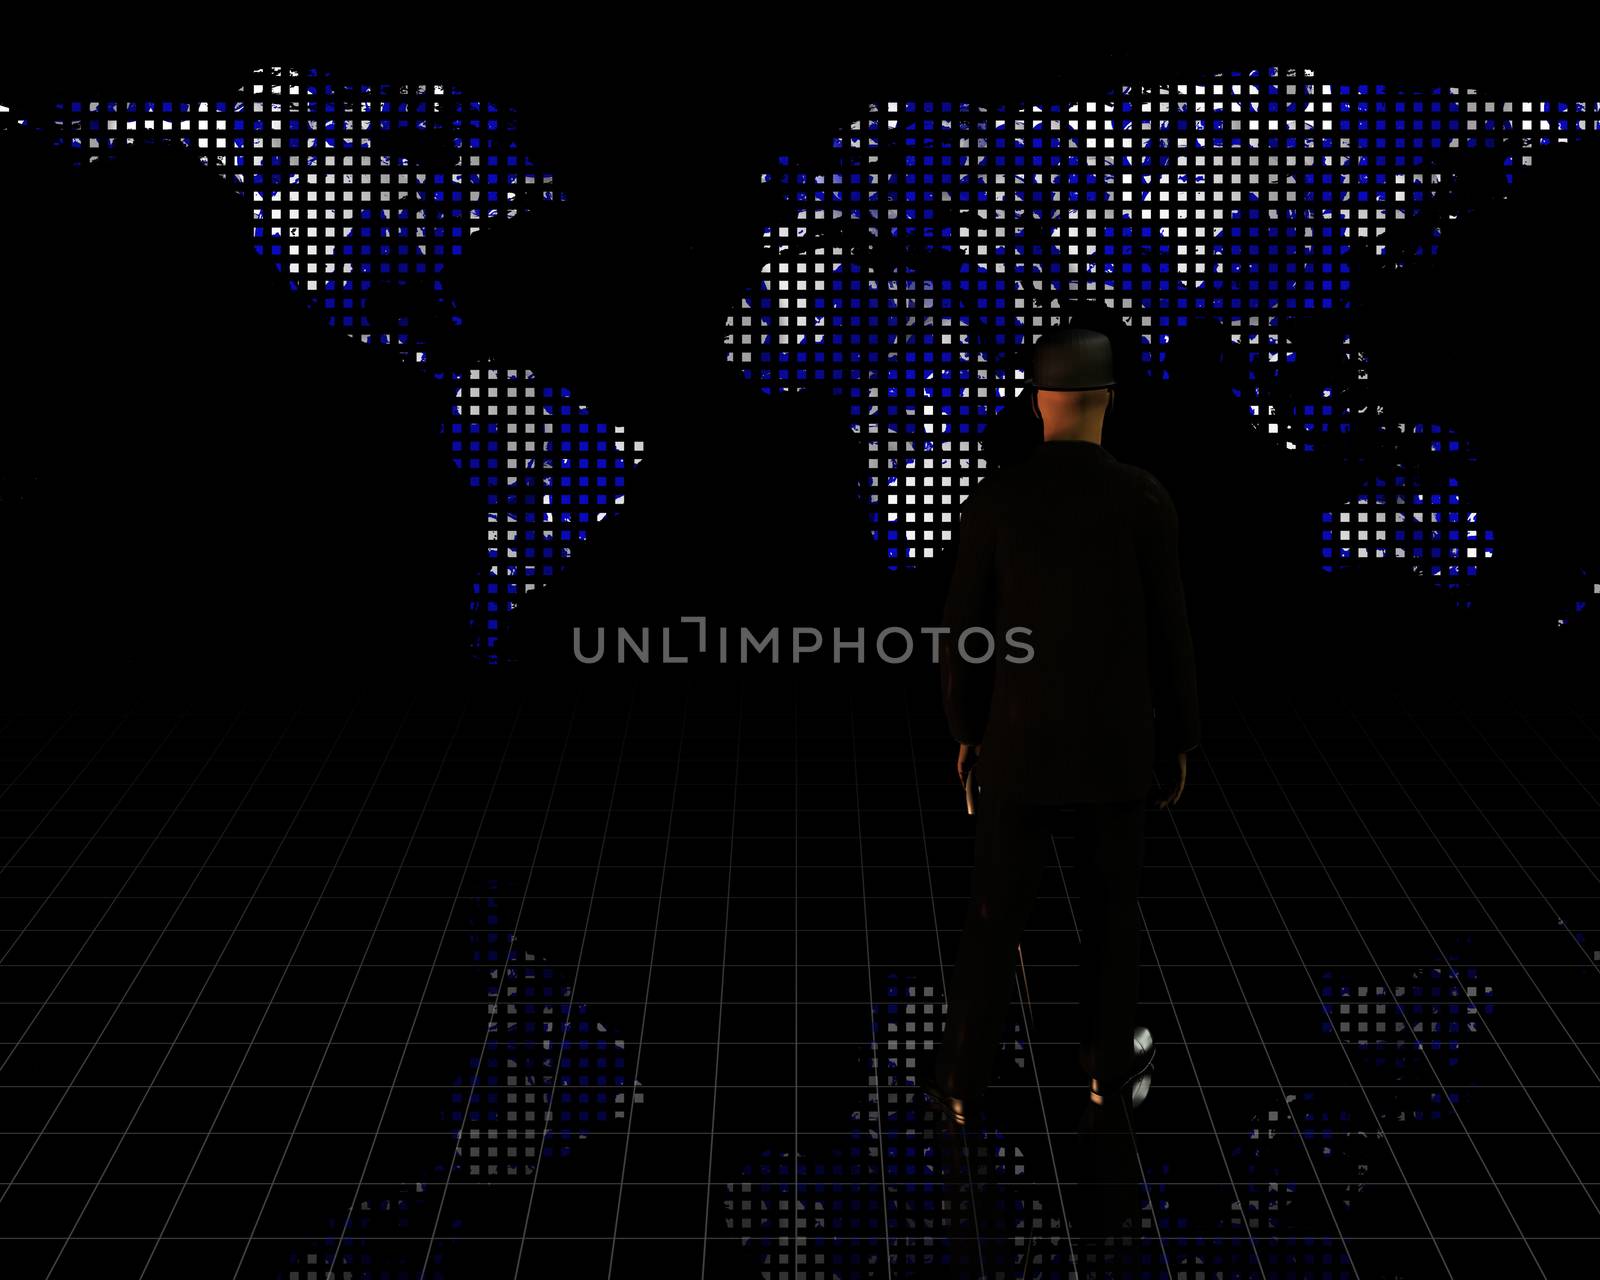 Man in suit stands before world map